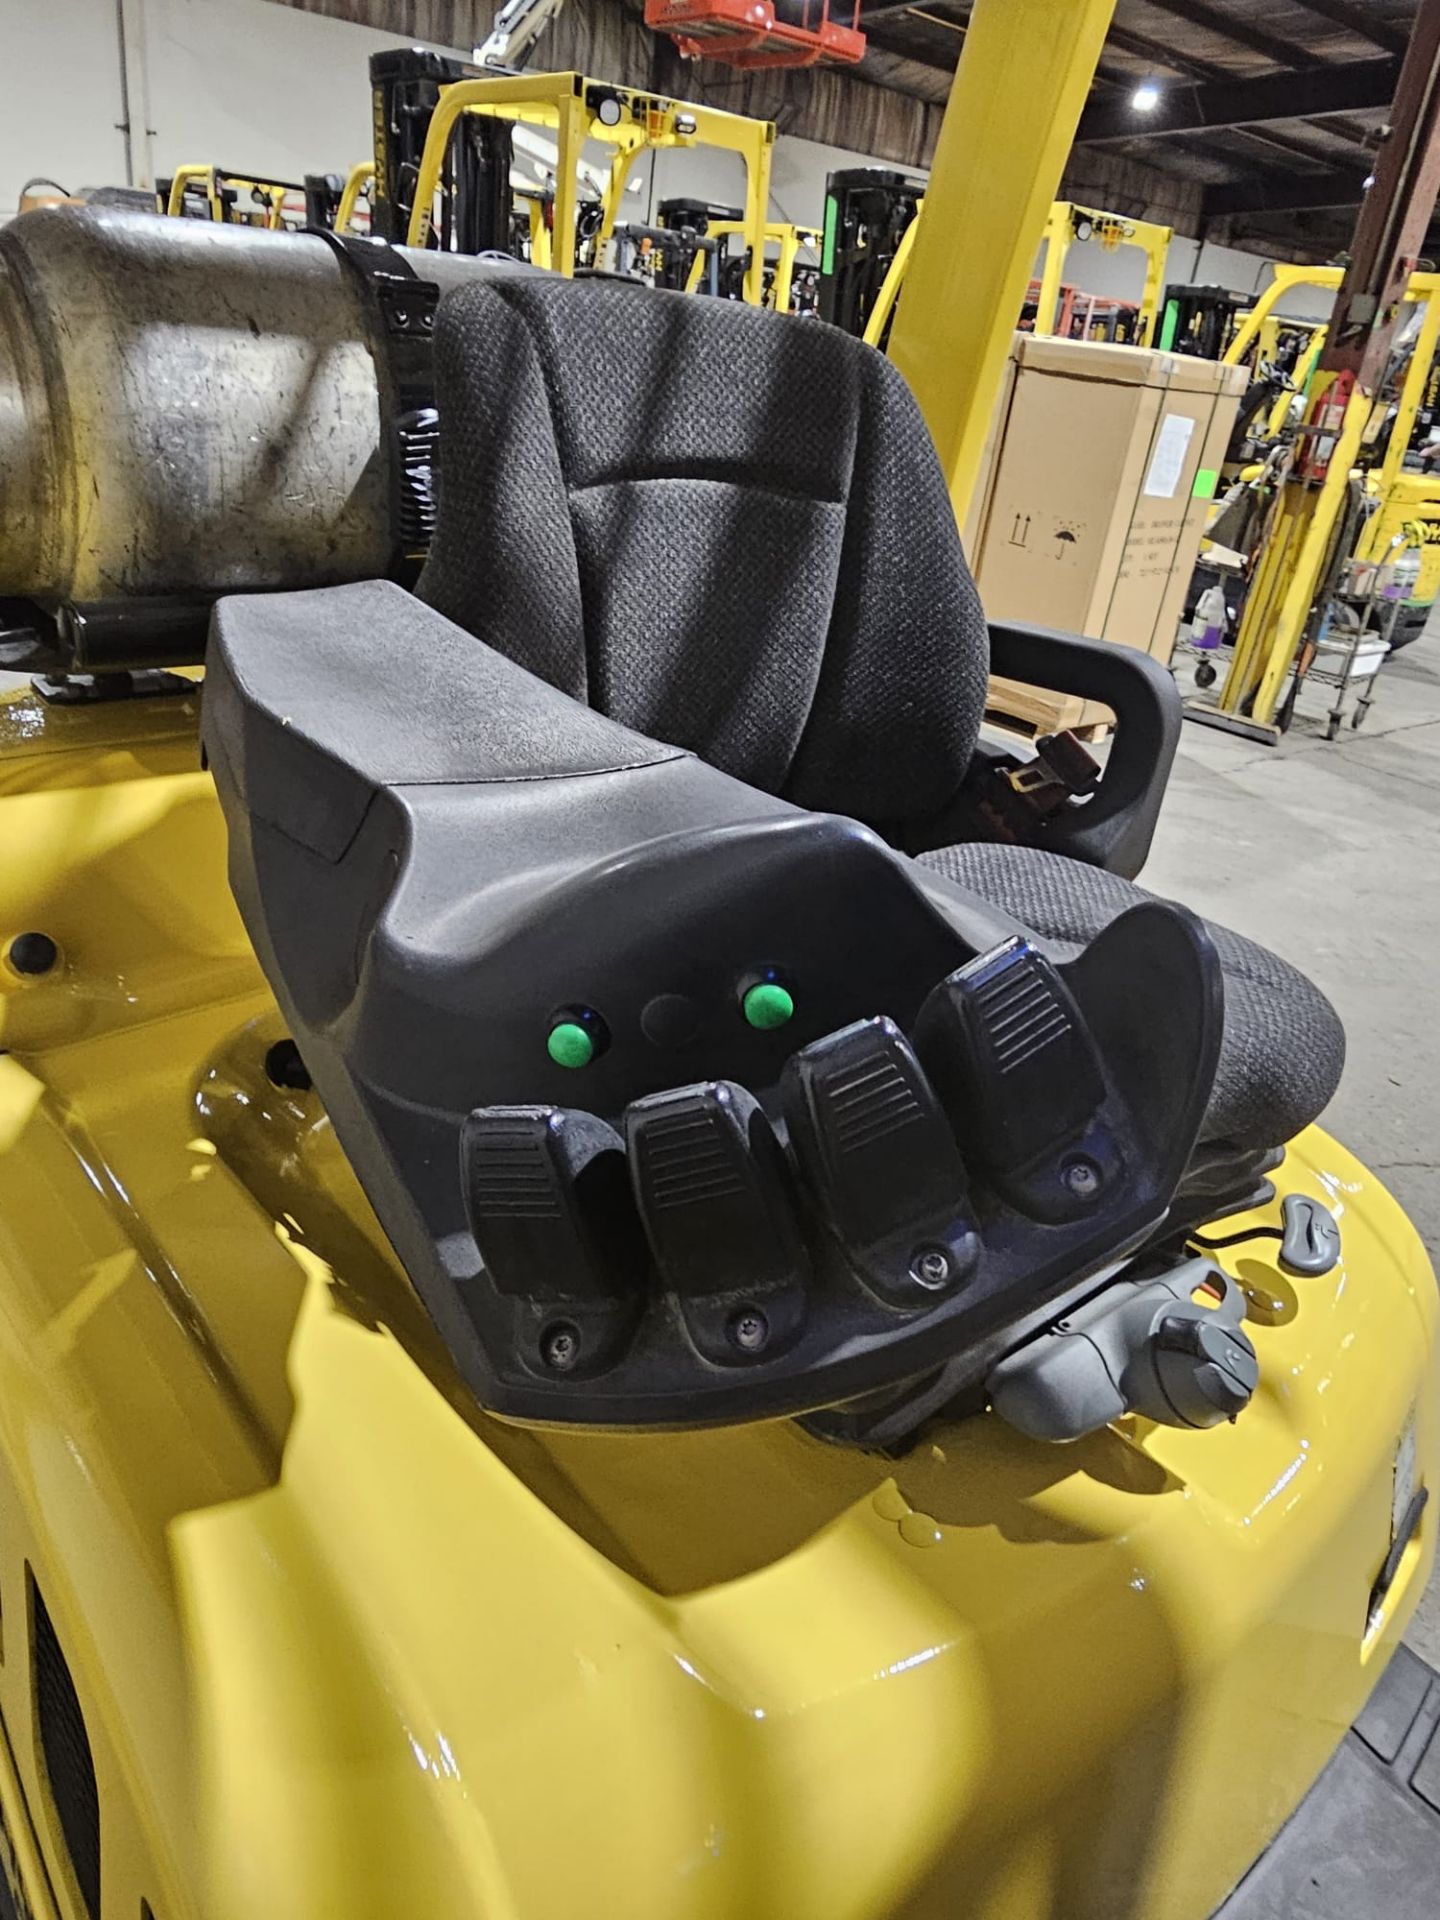 2016 HYSTER 5,000lbs Capacity LPG (Propane) Forklift with sideshift - 4 function control hookup & - Image 7 of 8